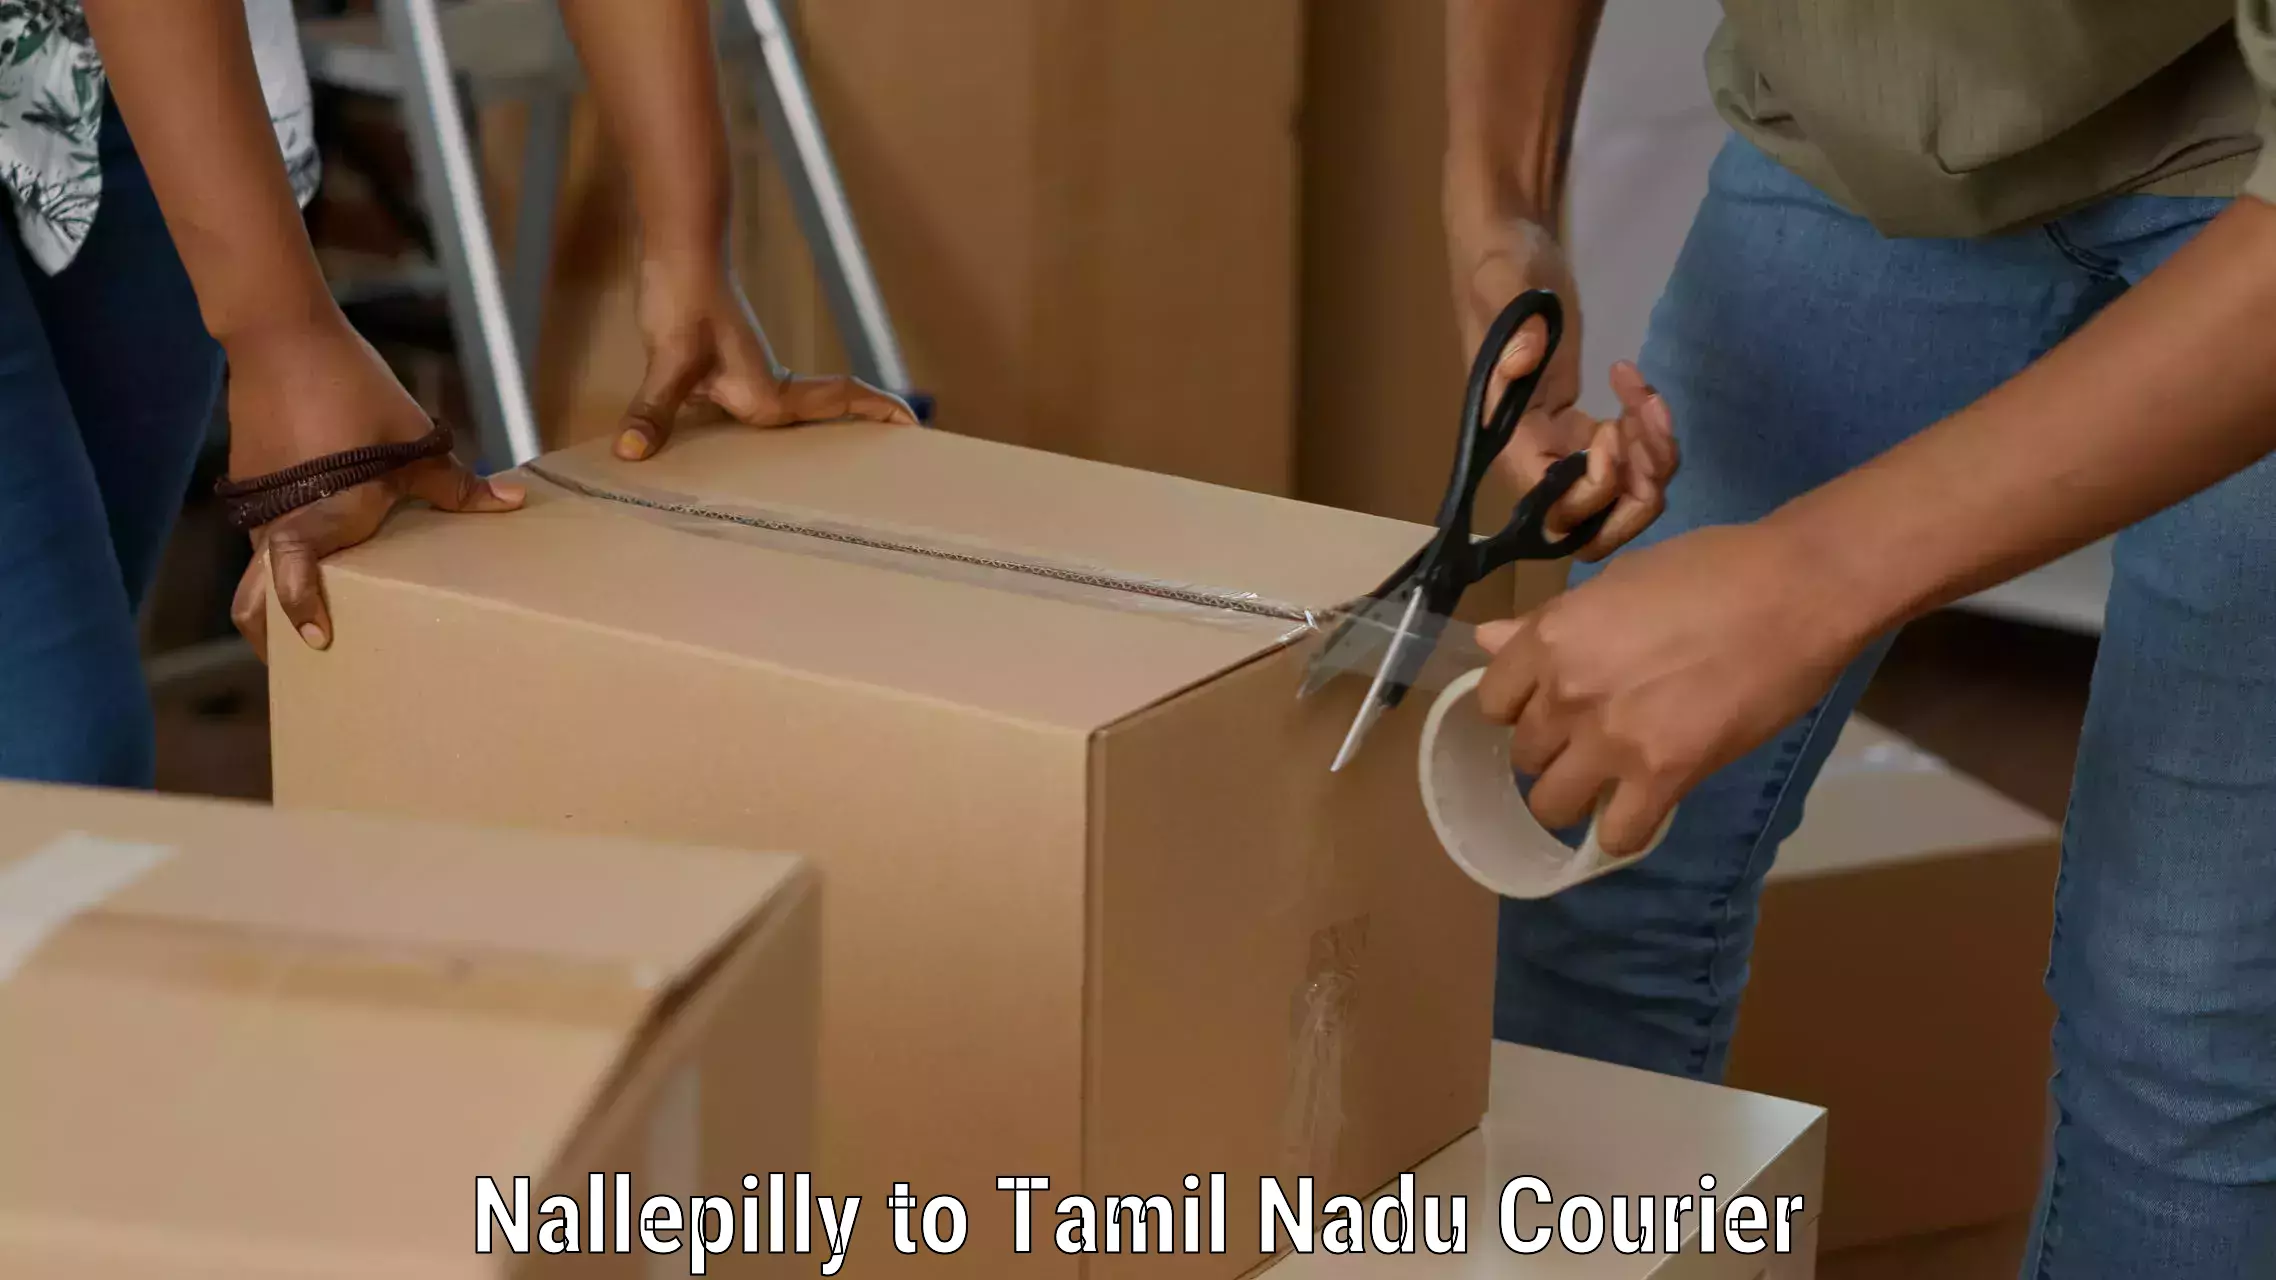 Express delivery capabilities in Nallepilly to Tamil Nadu